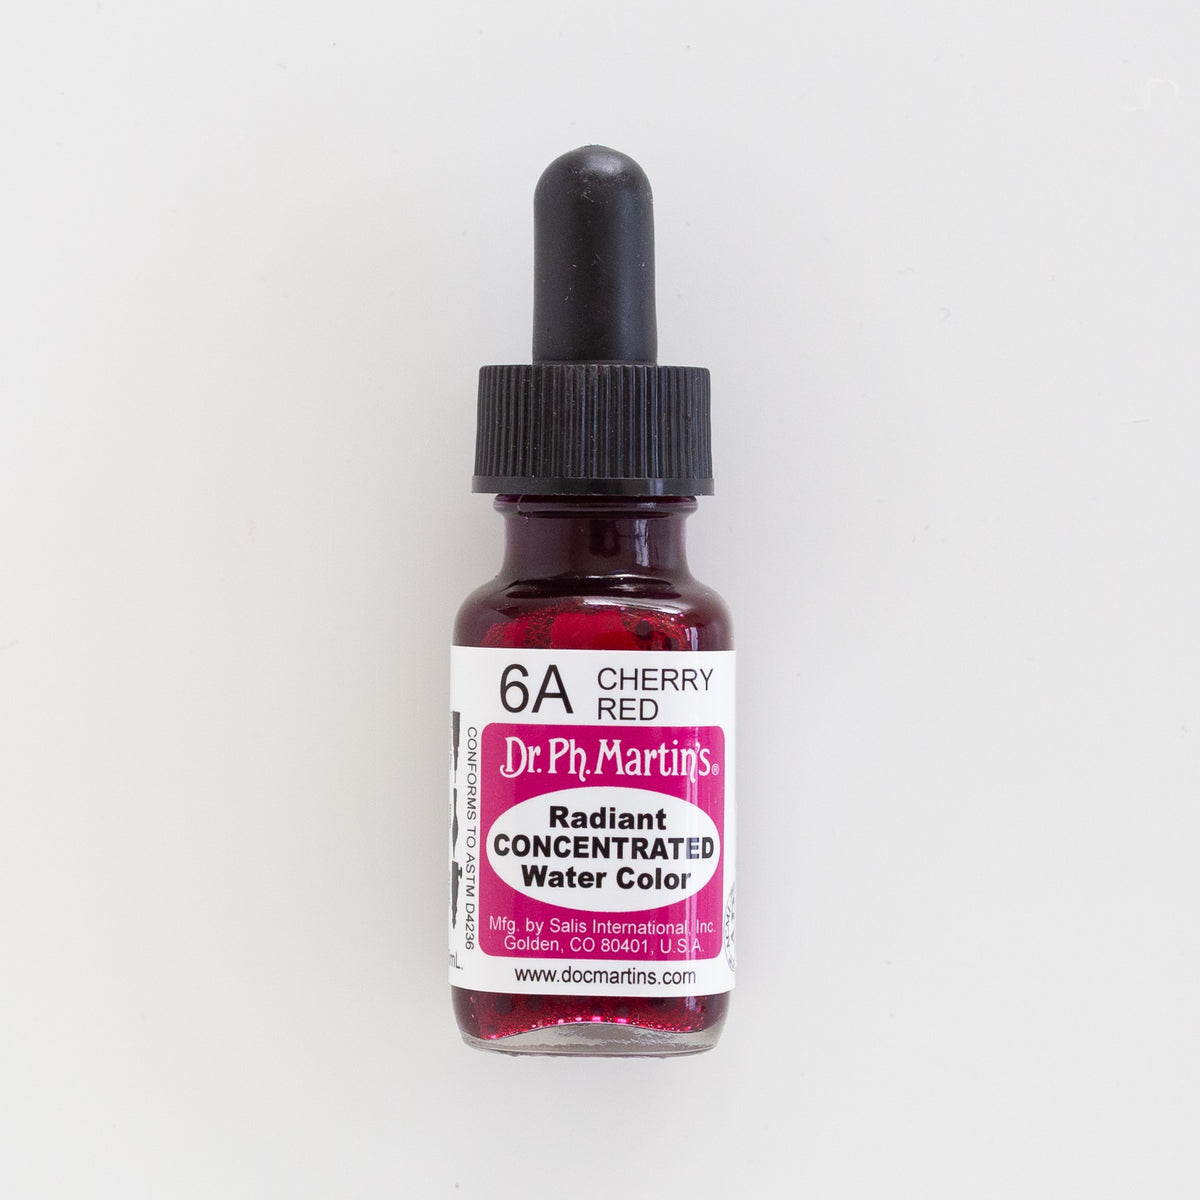 Dr. Ph. Martin’s Radiant Concentrated 6A Cherry Red